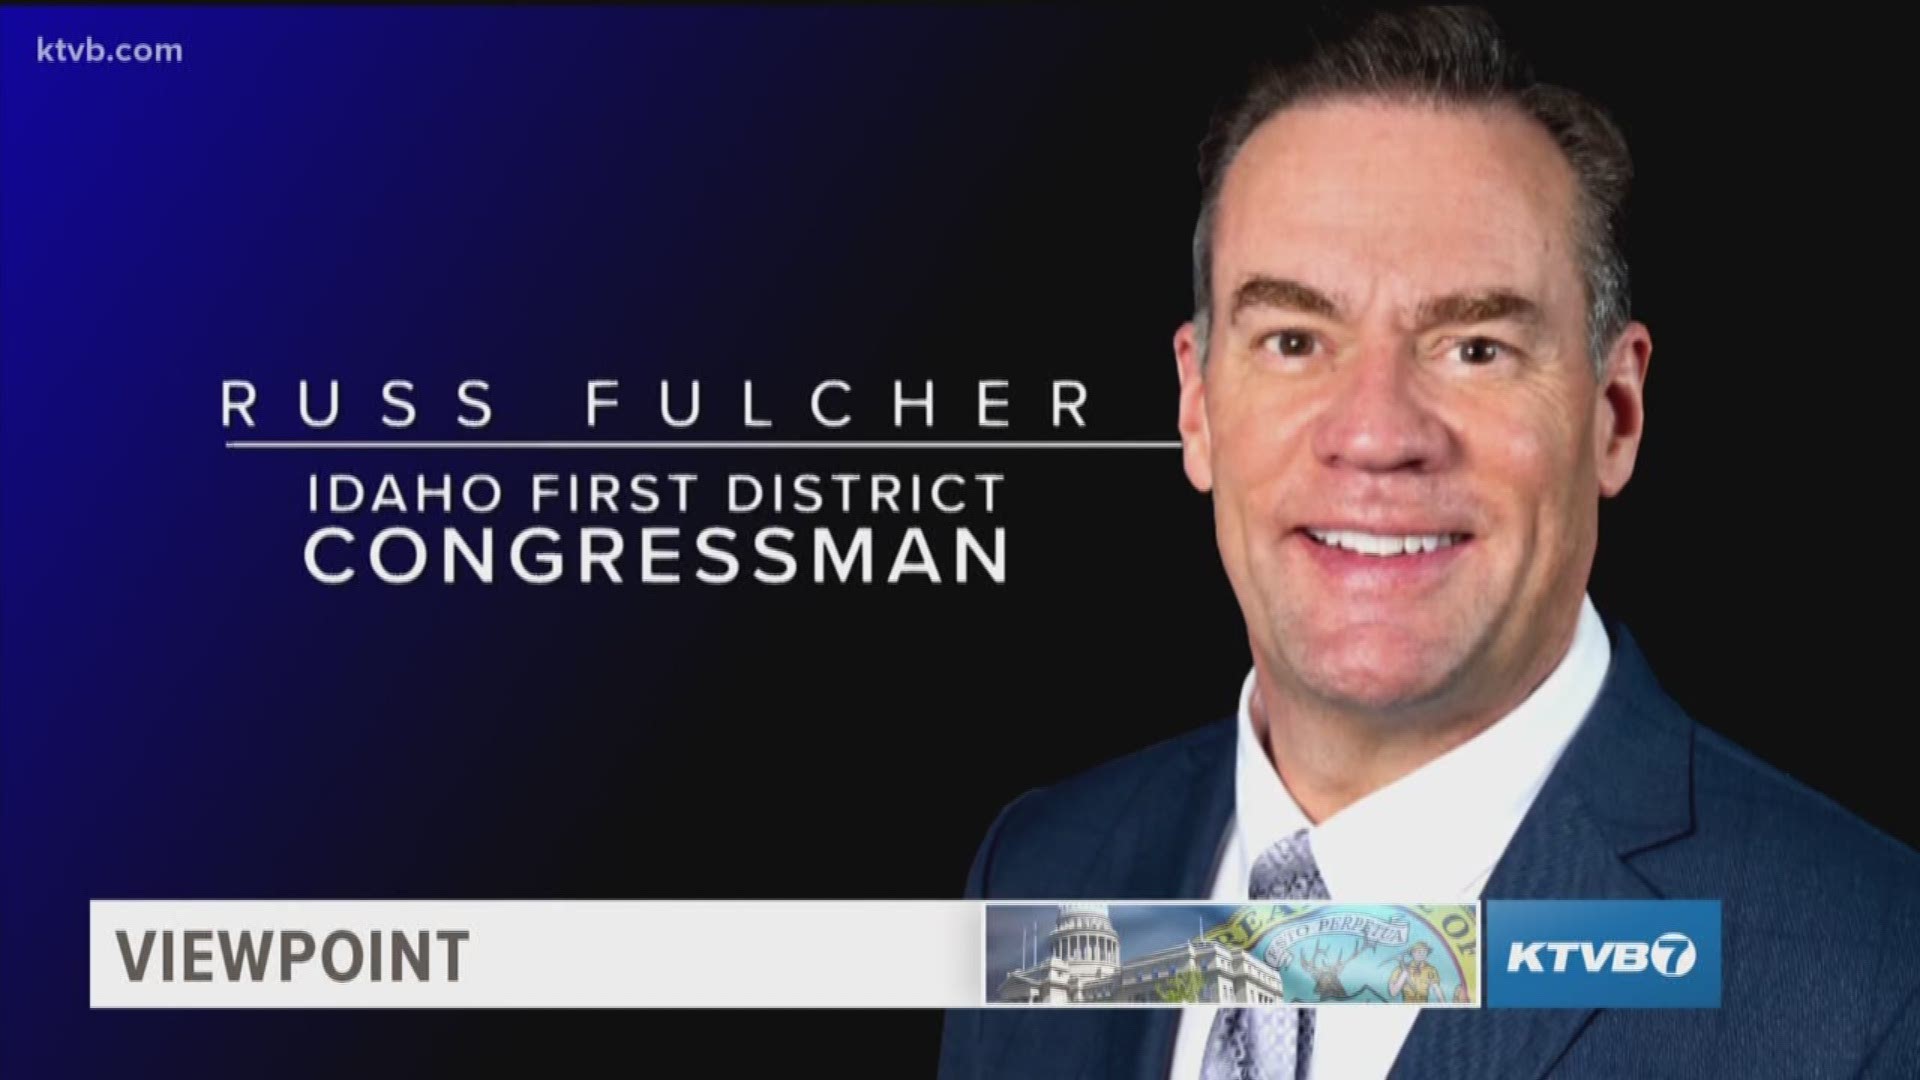 Idaho Congressman Russ Fulcher believes Congress will take action in some way to deal with gun violence in the wake of two mass shootings in Dayton, Ohio and El Paso, Texas. During the taping of this week's Viewpoint, the Republican representative shared his thoughts on mass shootings and other major issues going on in America.